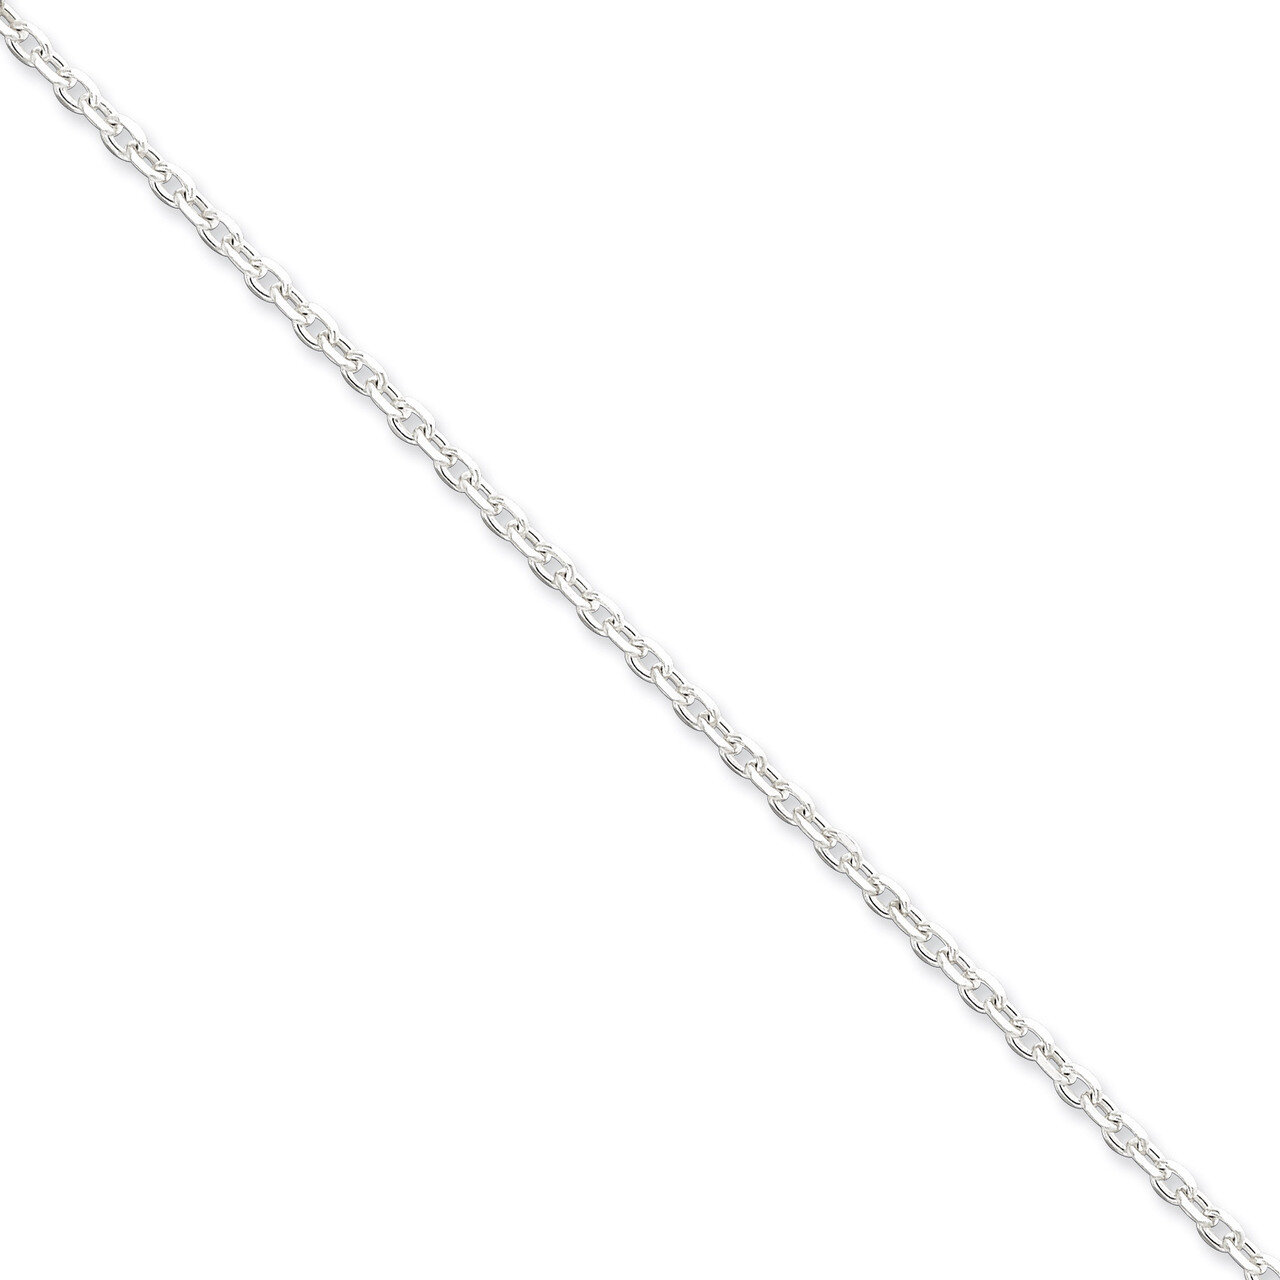 24 Inch 2.75mm Beveled Oval Cable Pendant Chain Sterling Silver QPE15-24